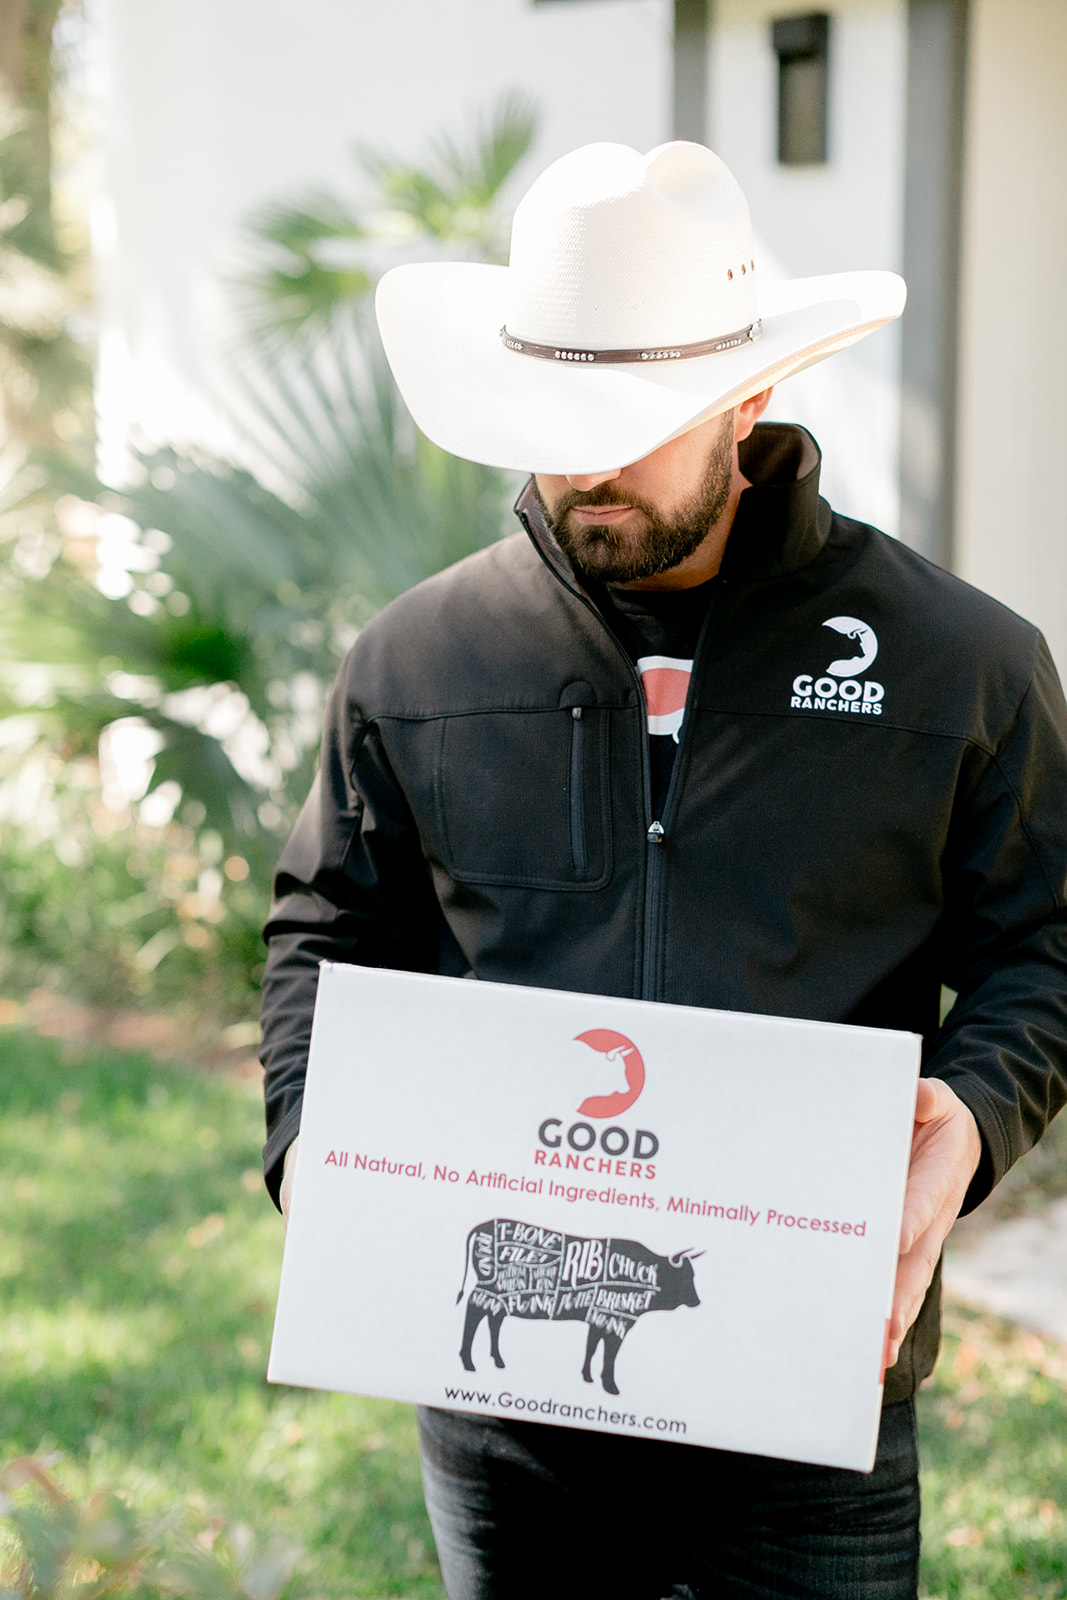 Good Ranchers: Meat Subscription Company Delivering Quality Meat To Your Door